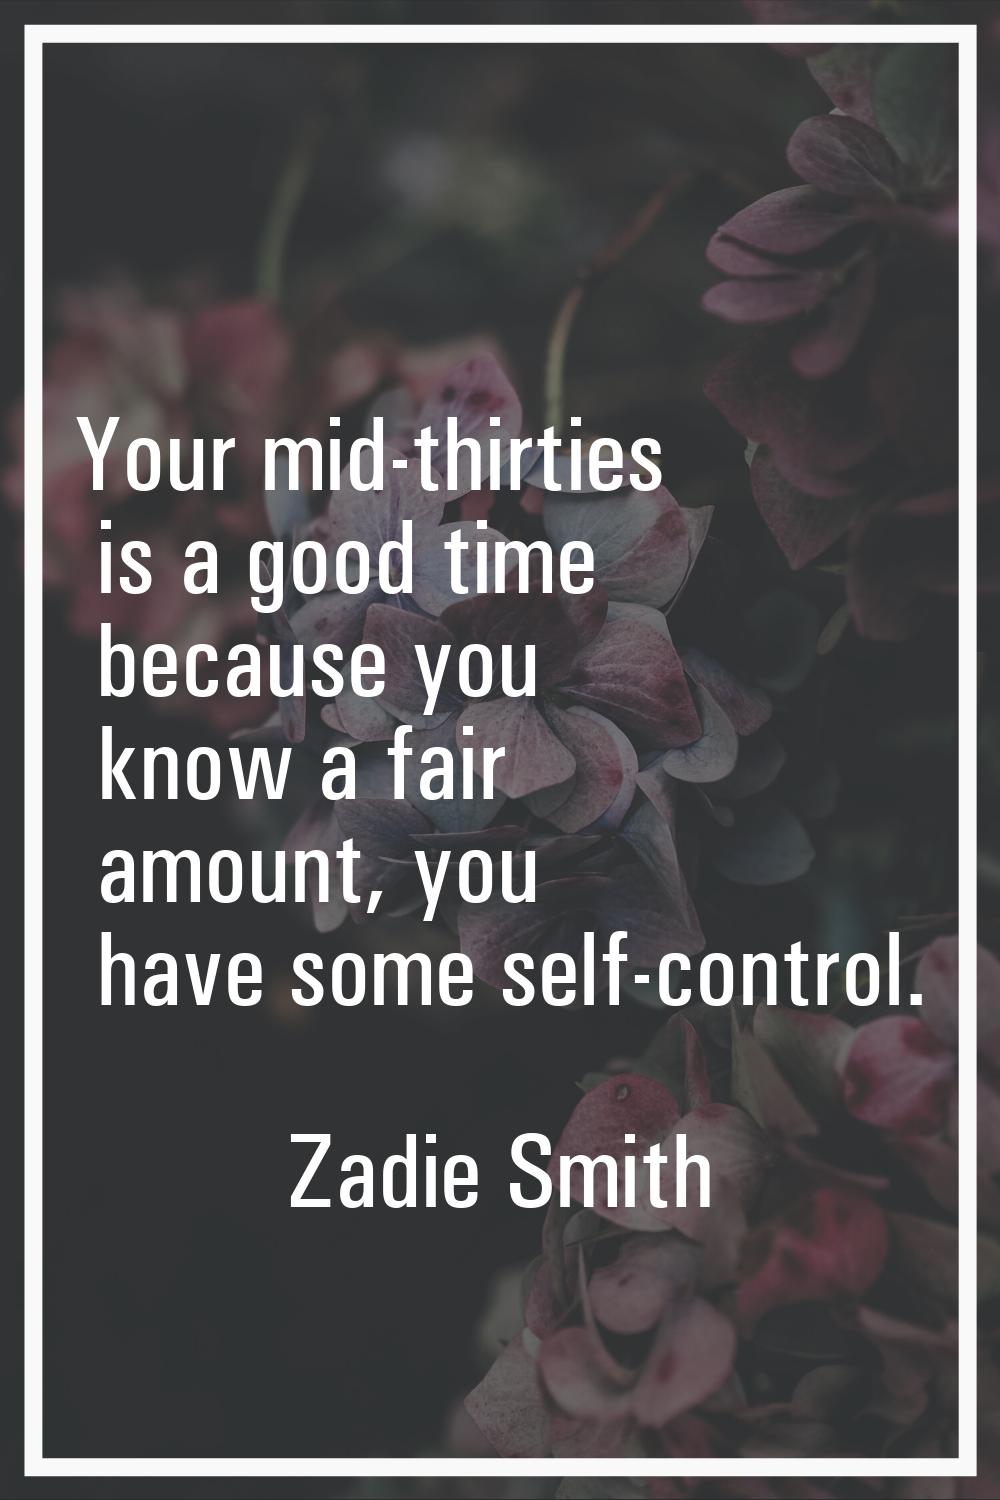 Your mid-thirties is a good time because you know a fair amount, you have some self-control.